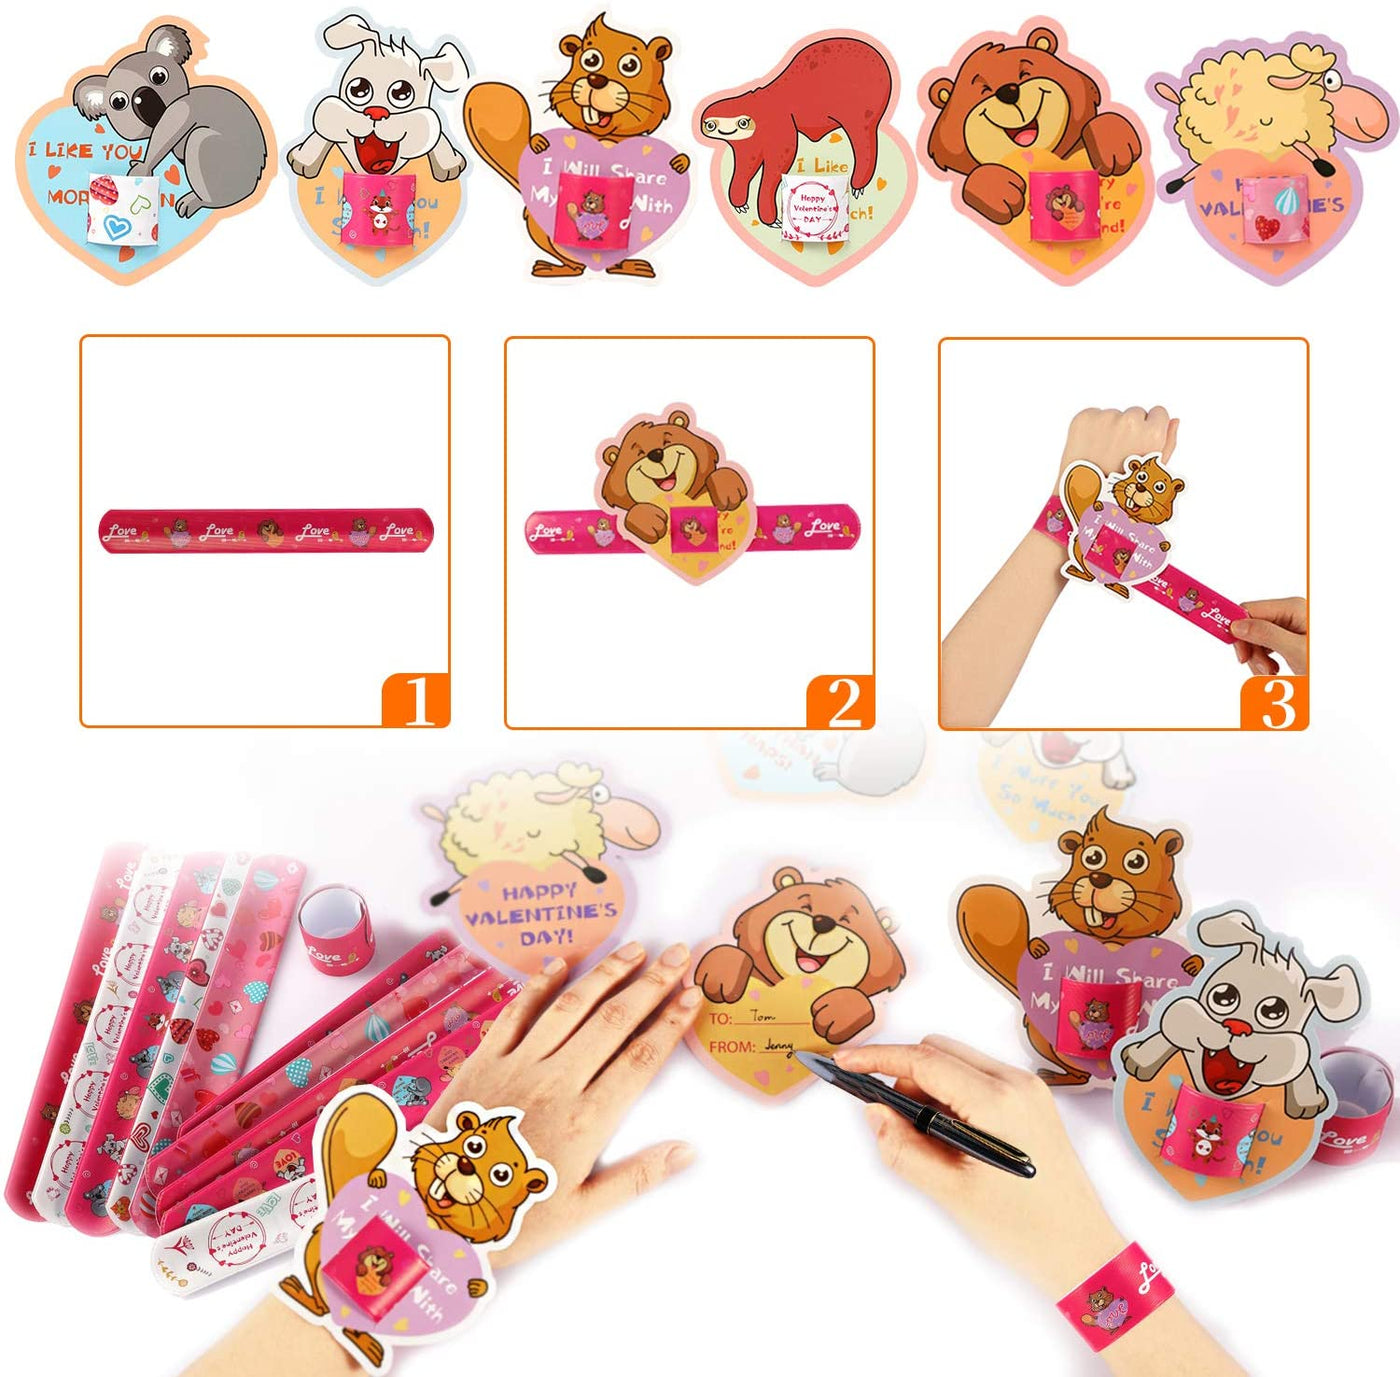 Mibor Valentines Day Cards for Kids - 30 Slap Bracelets + 30 Valentines Cards for Kids Class, 6 Cute Animals Patterns Cards, Kids Valentines Day Cards for School Classroom Valentines Day Decorations